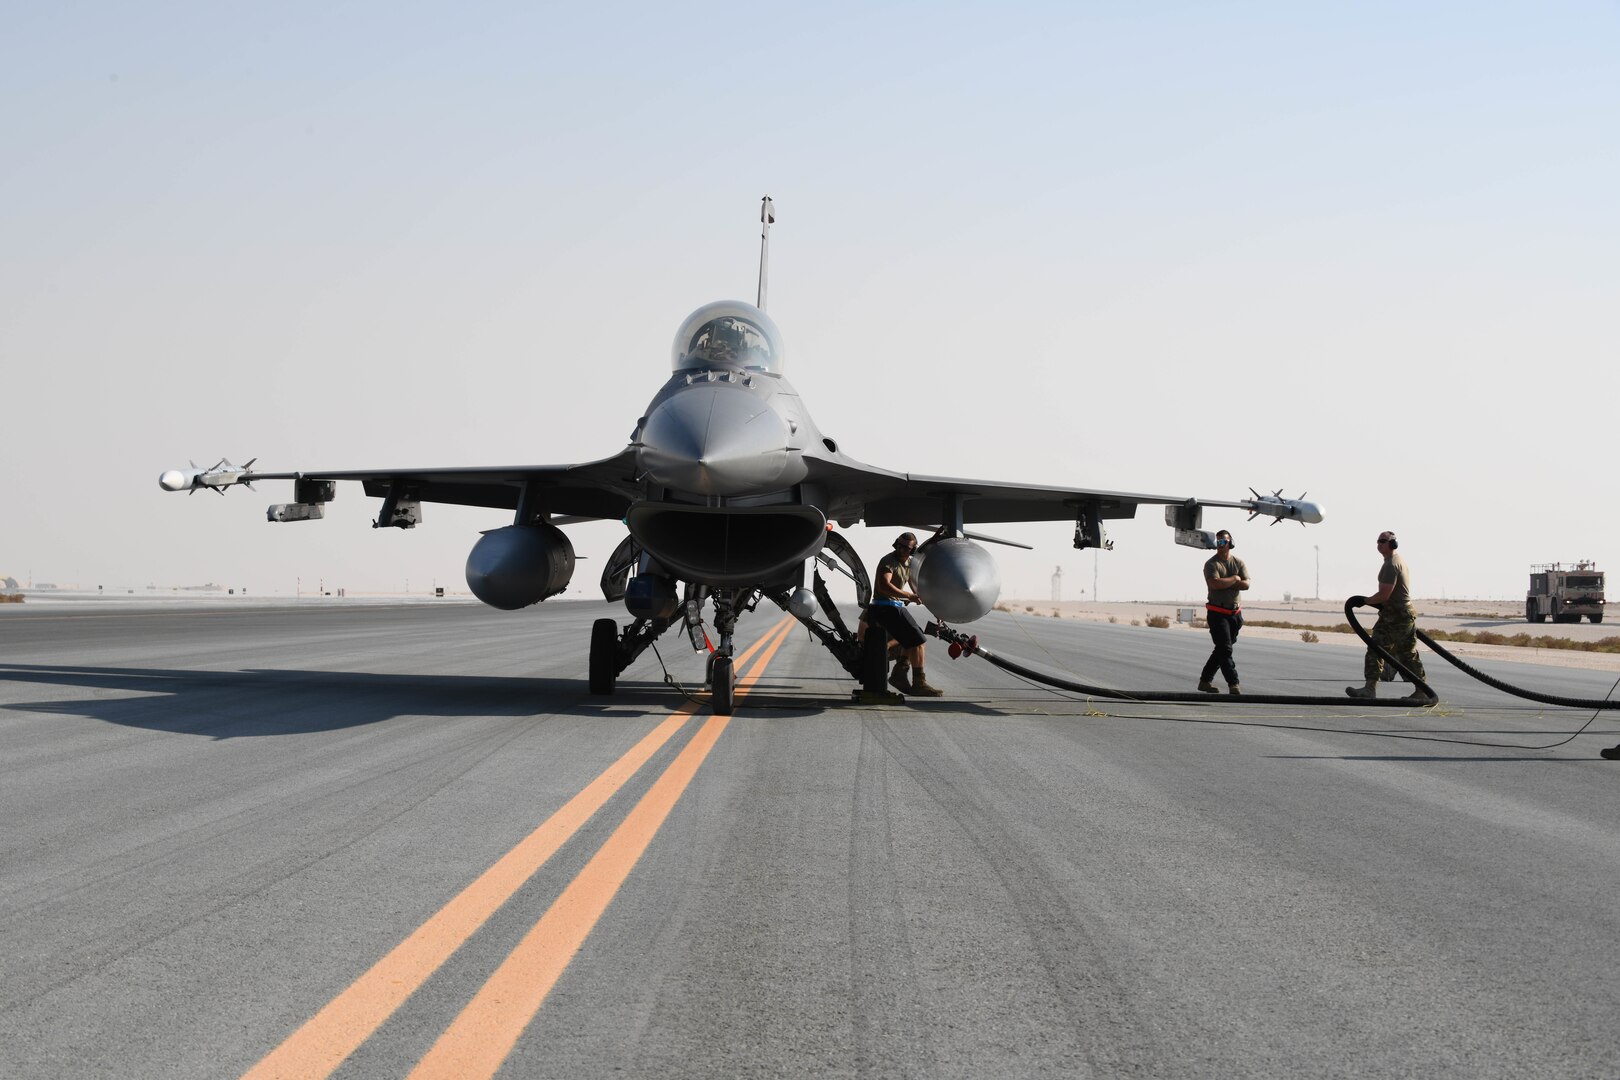 Airmen assigned to the 379th Expeditionary Maintenance Group at Al Udeid Air Base, Qatar, hook a fuel hose to a U.S. Air Force F-16 Fighting Falcon assigned to the 77th Fighter Squadron from Prince Sultan Air Base, Kingdom of Saudi Arabia, on the flight line of AUAB on Nov. 10, 2020. The hot-pit training qualified AUAB Airmen assigned to the 379th Expeditionary Maintenance Group and the 379th Expeditionary Logistics Readiness Squadron to support 24-hour hot refueling operations on multiple aircraft that rotate through the base. Hot-pit refueling allows aircrew to land and keep their engines running while they refuel, before taking off to continue the next leg of their respective missions. (U.S. Air Force photo by Staff Sgt. Kayla White)